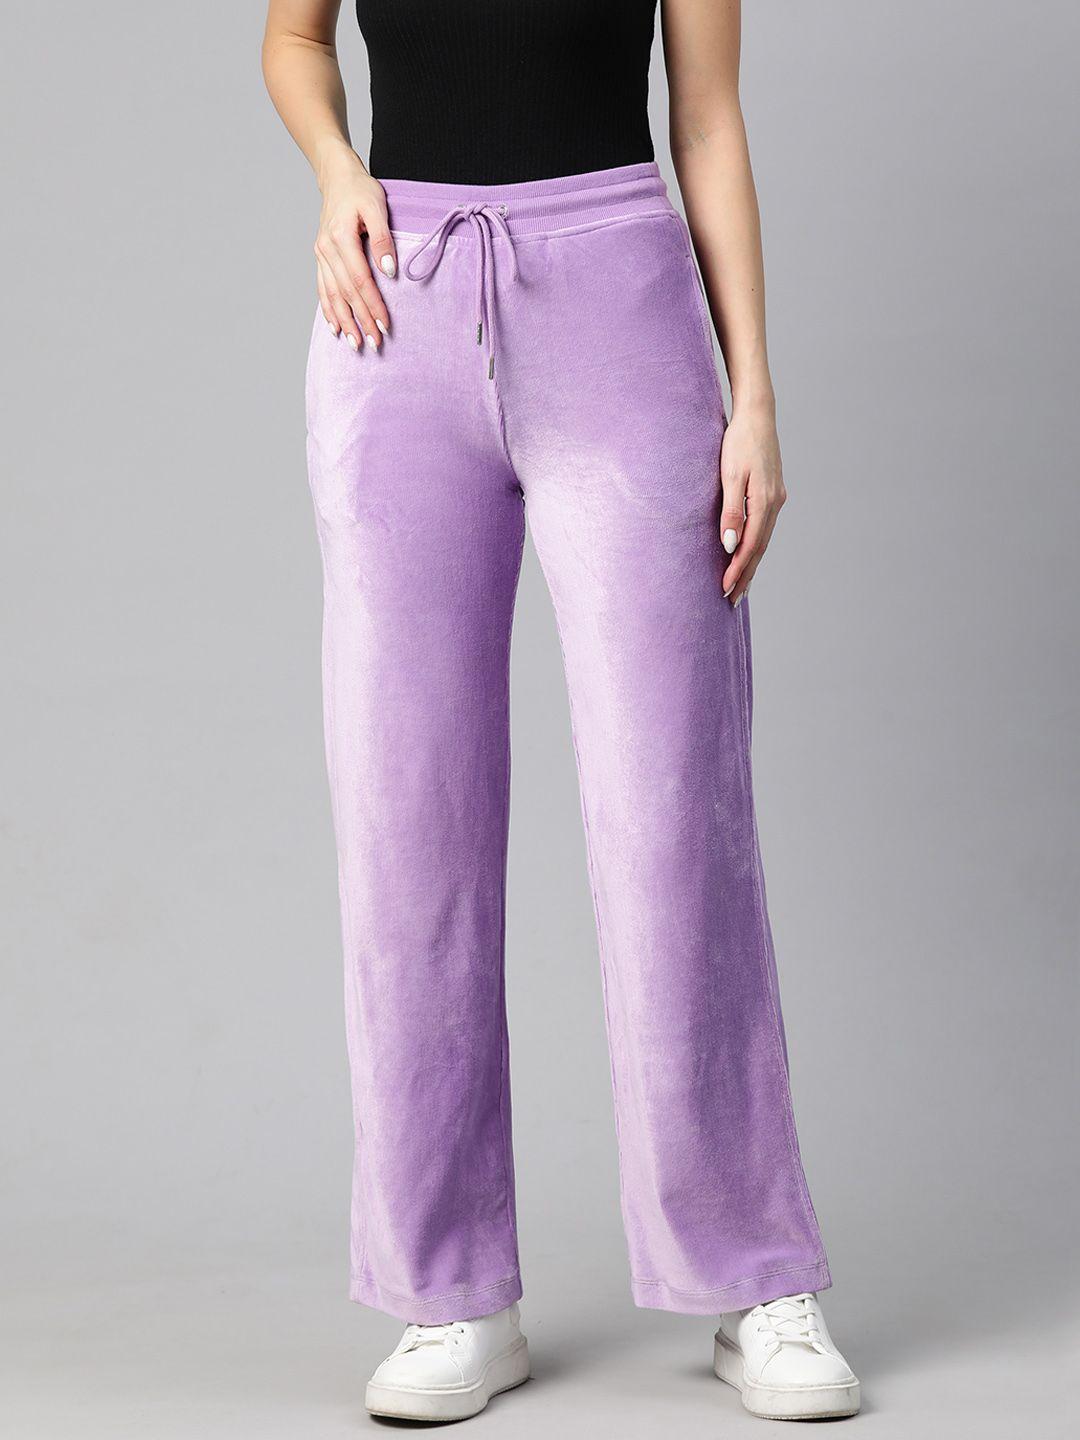 marks-&-spencer-women-jogger-style-trousers